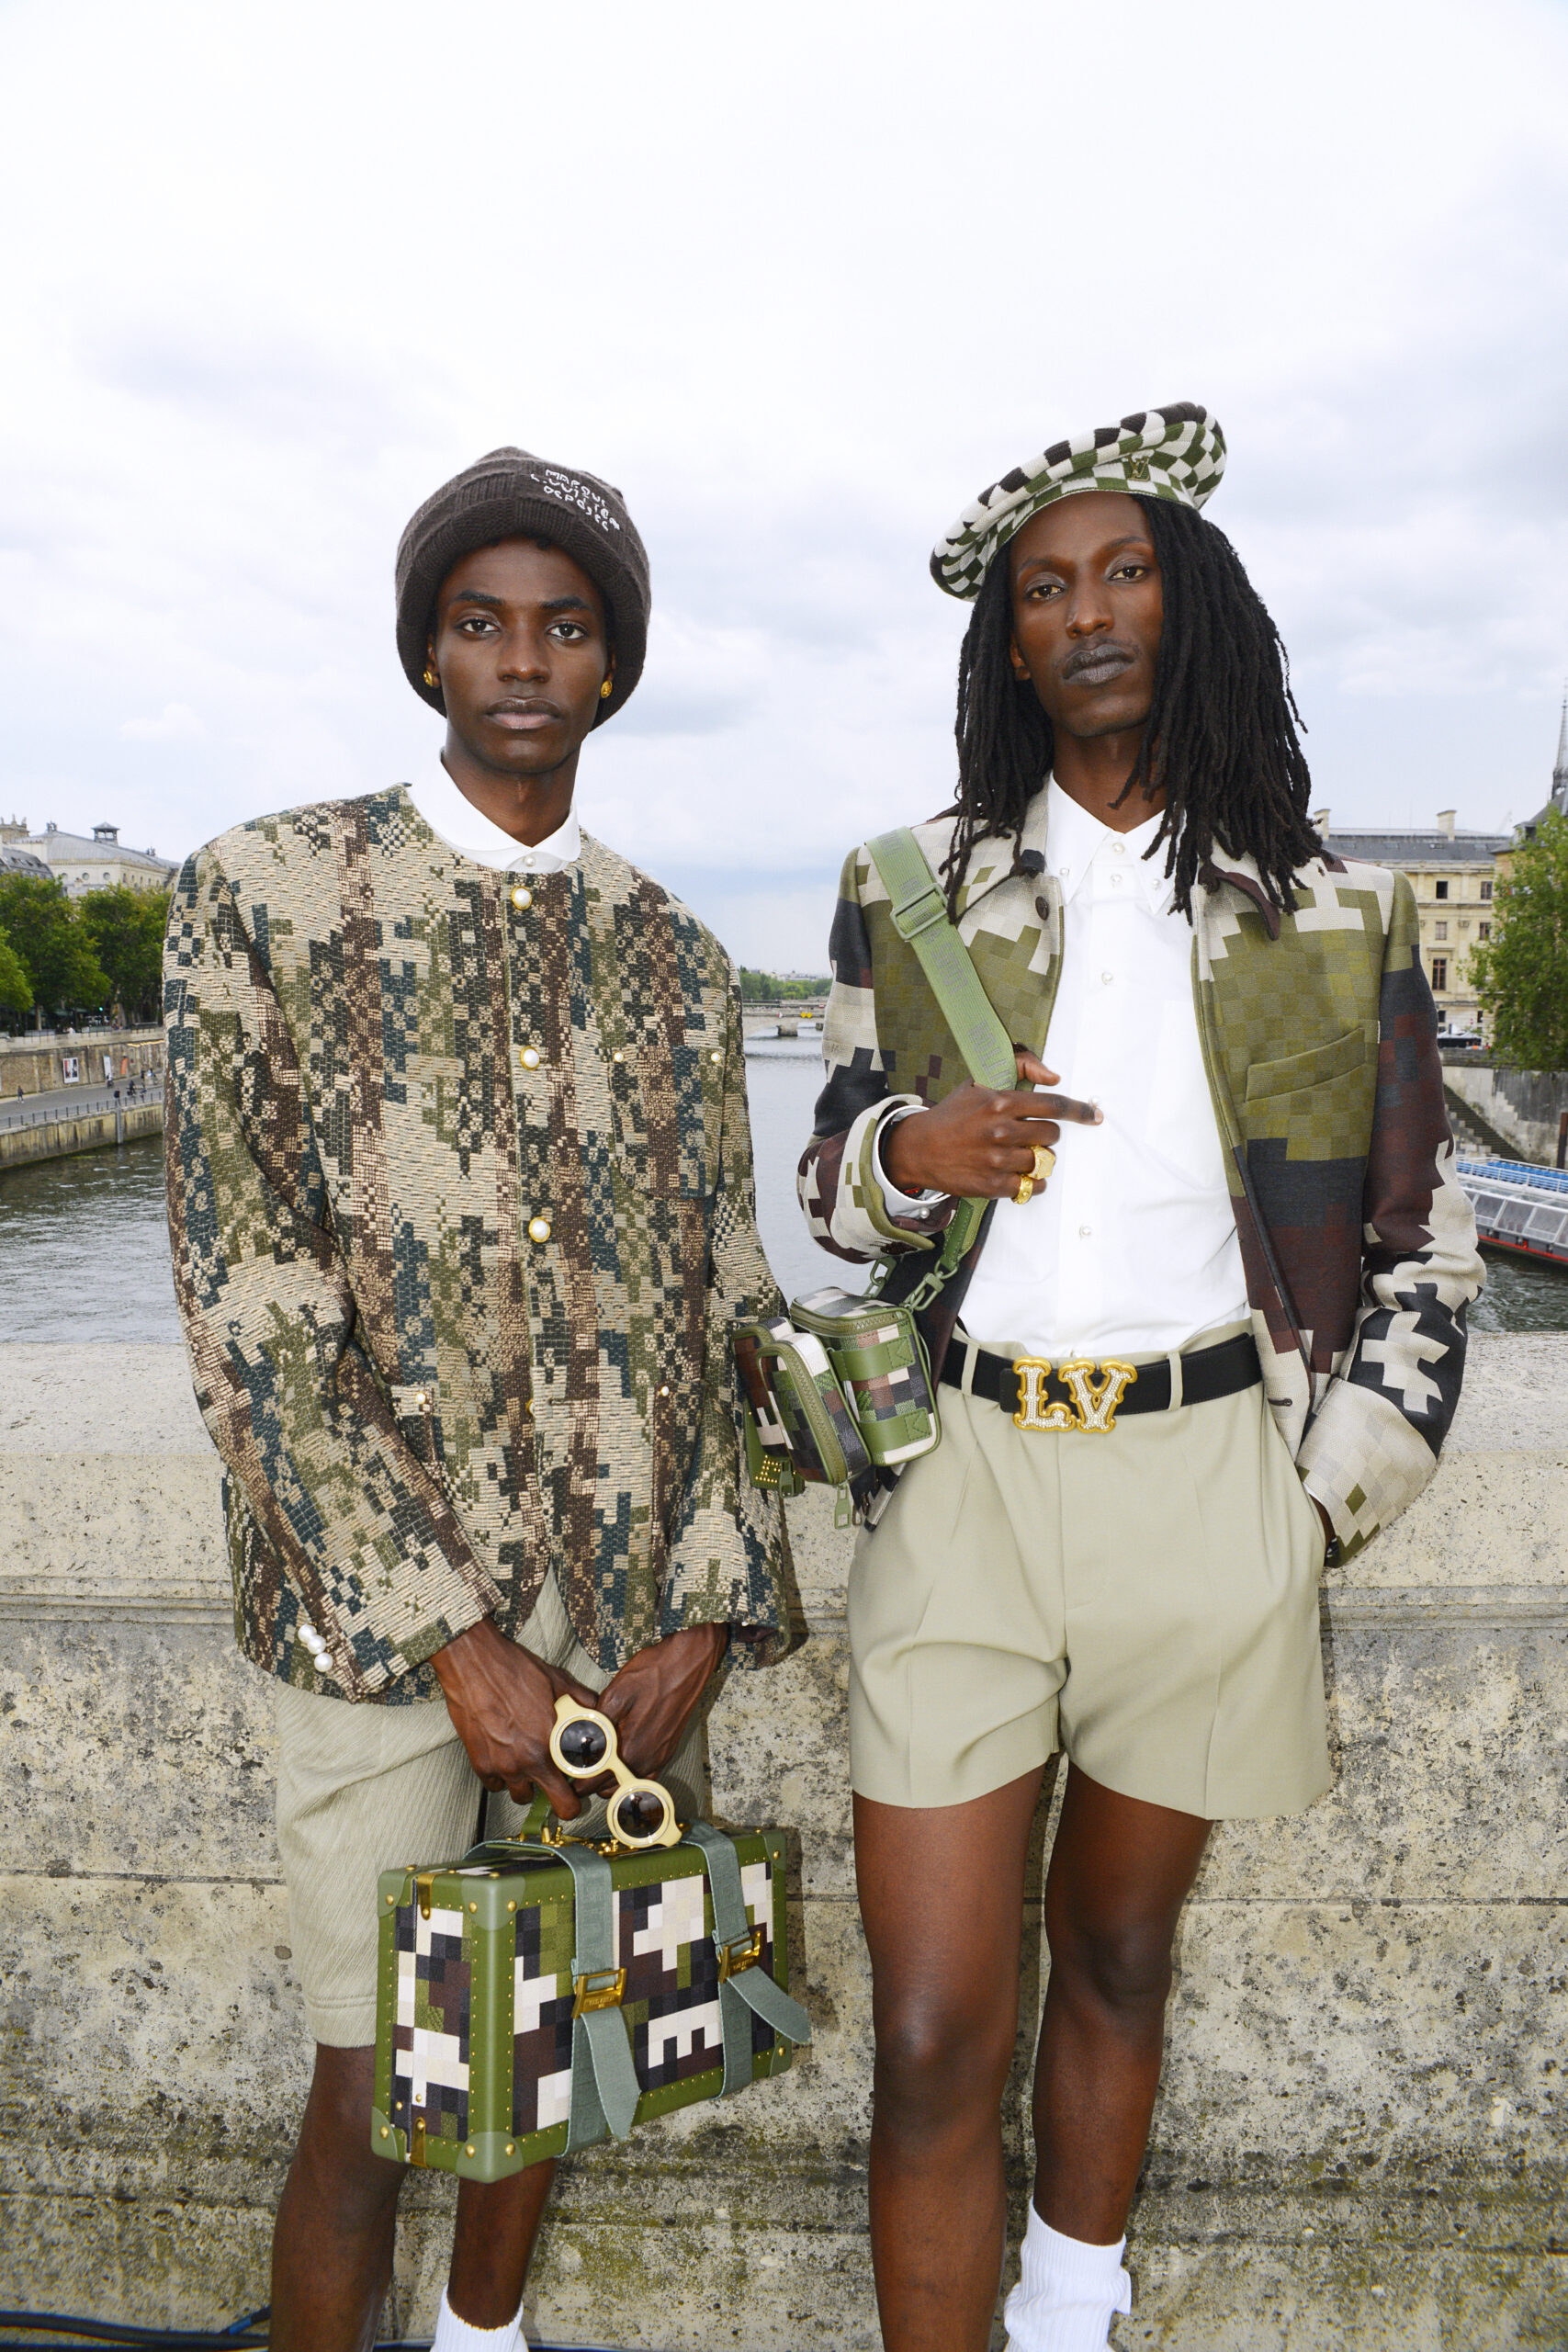 Louis Vuitton Had the Most Stacked Front Row of Spring 2023